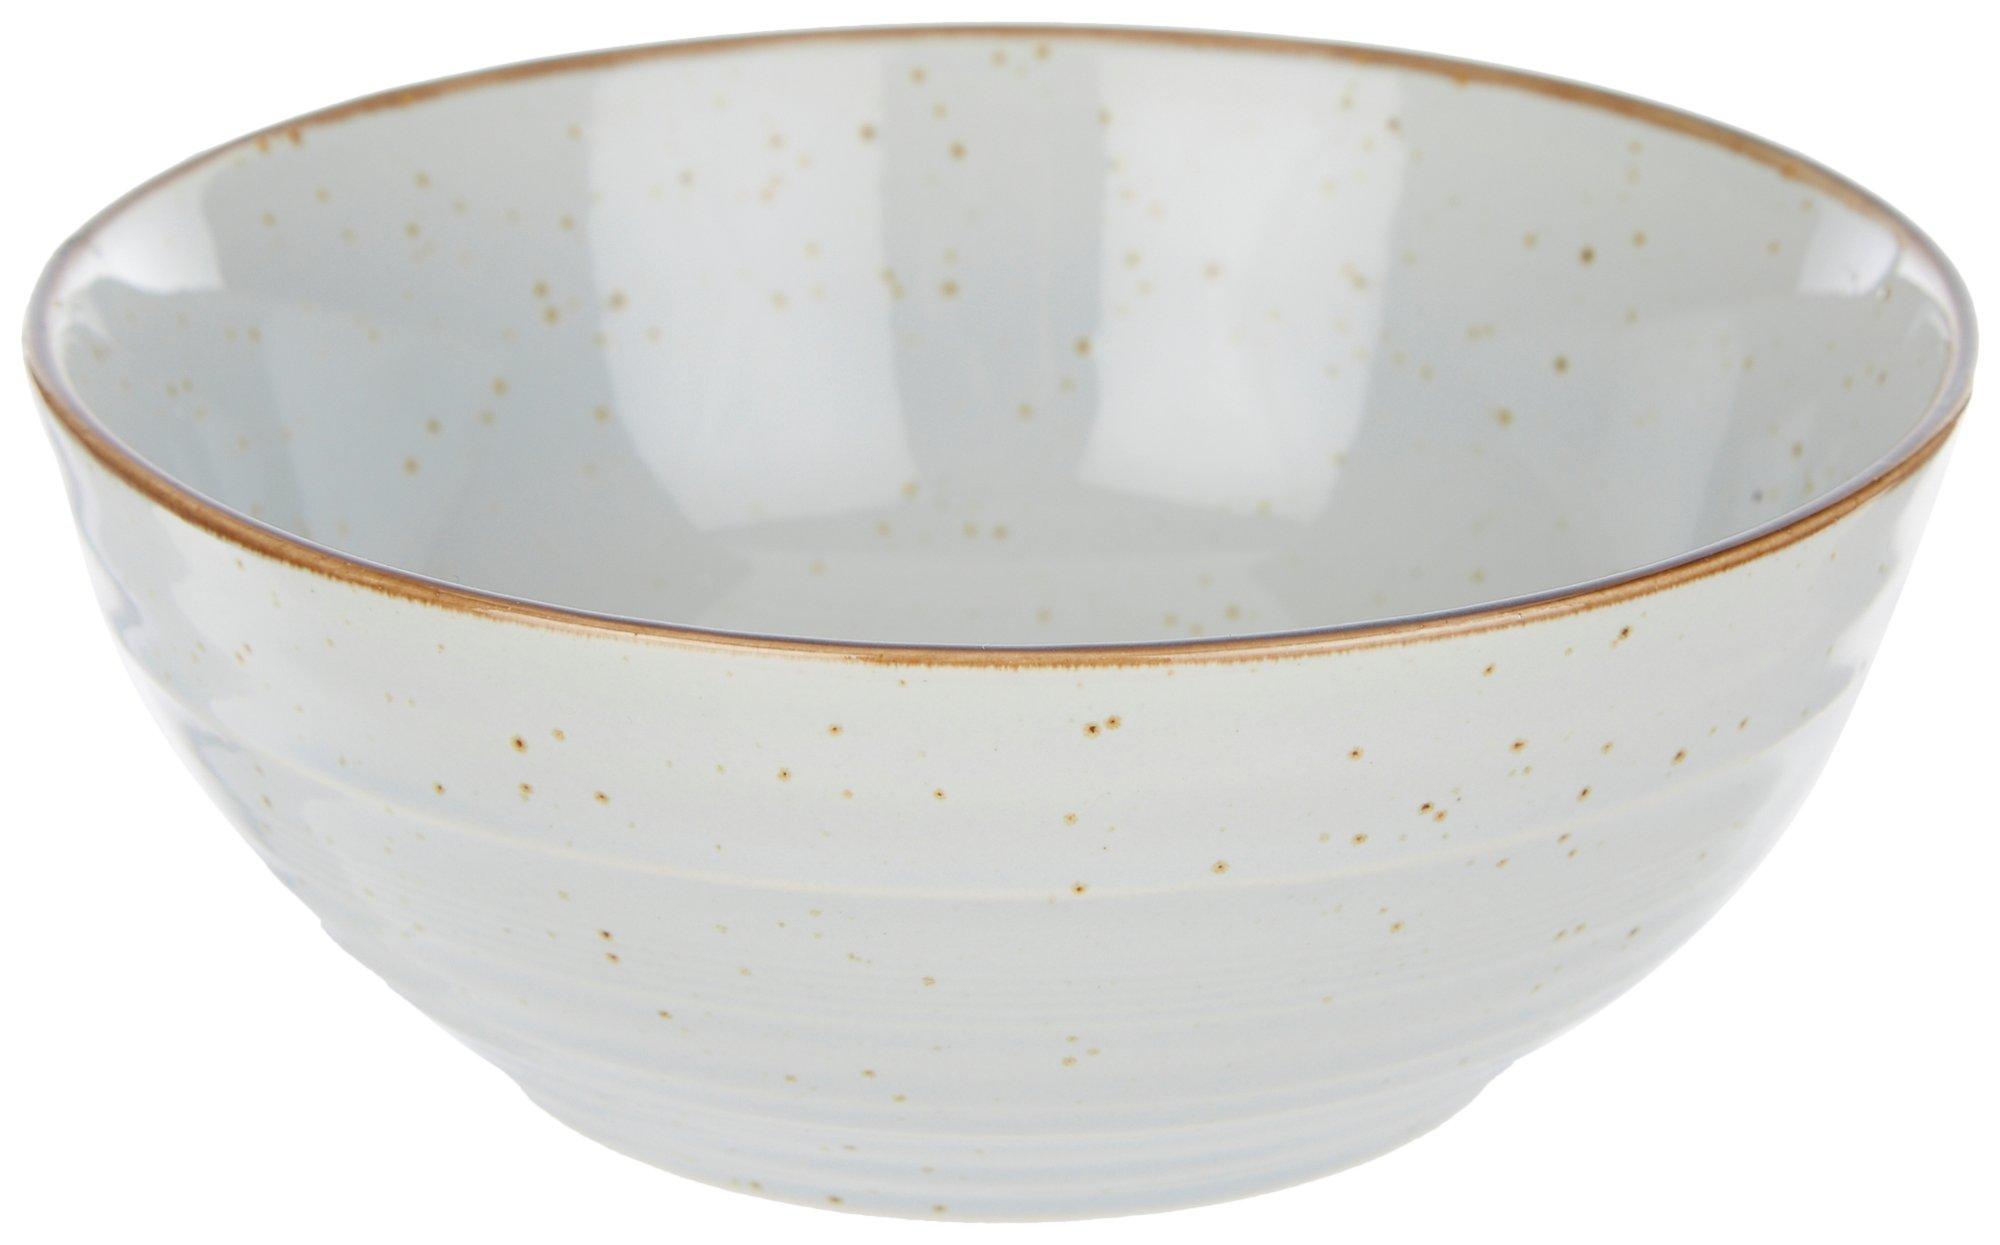 Northpoint Trading Speckled Spa Bowl